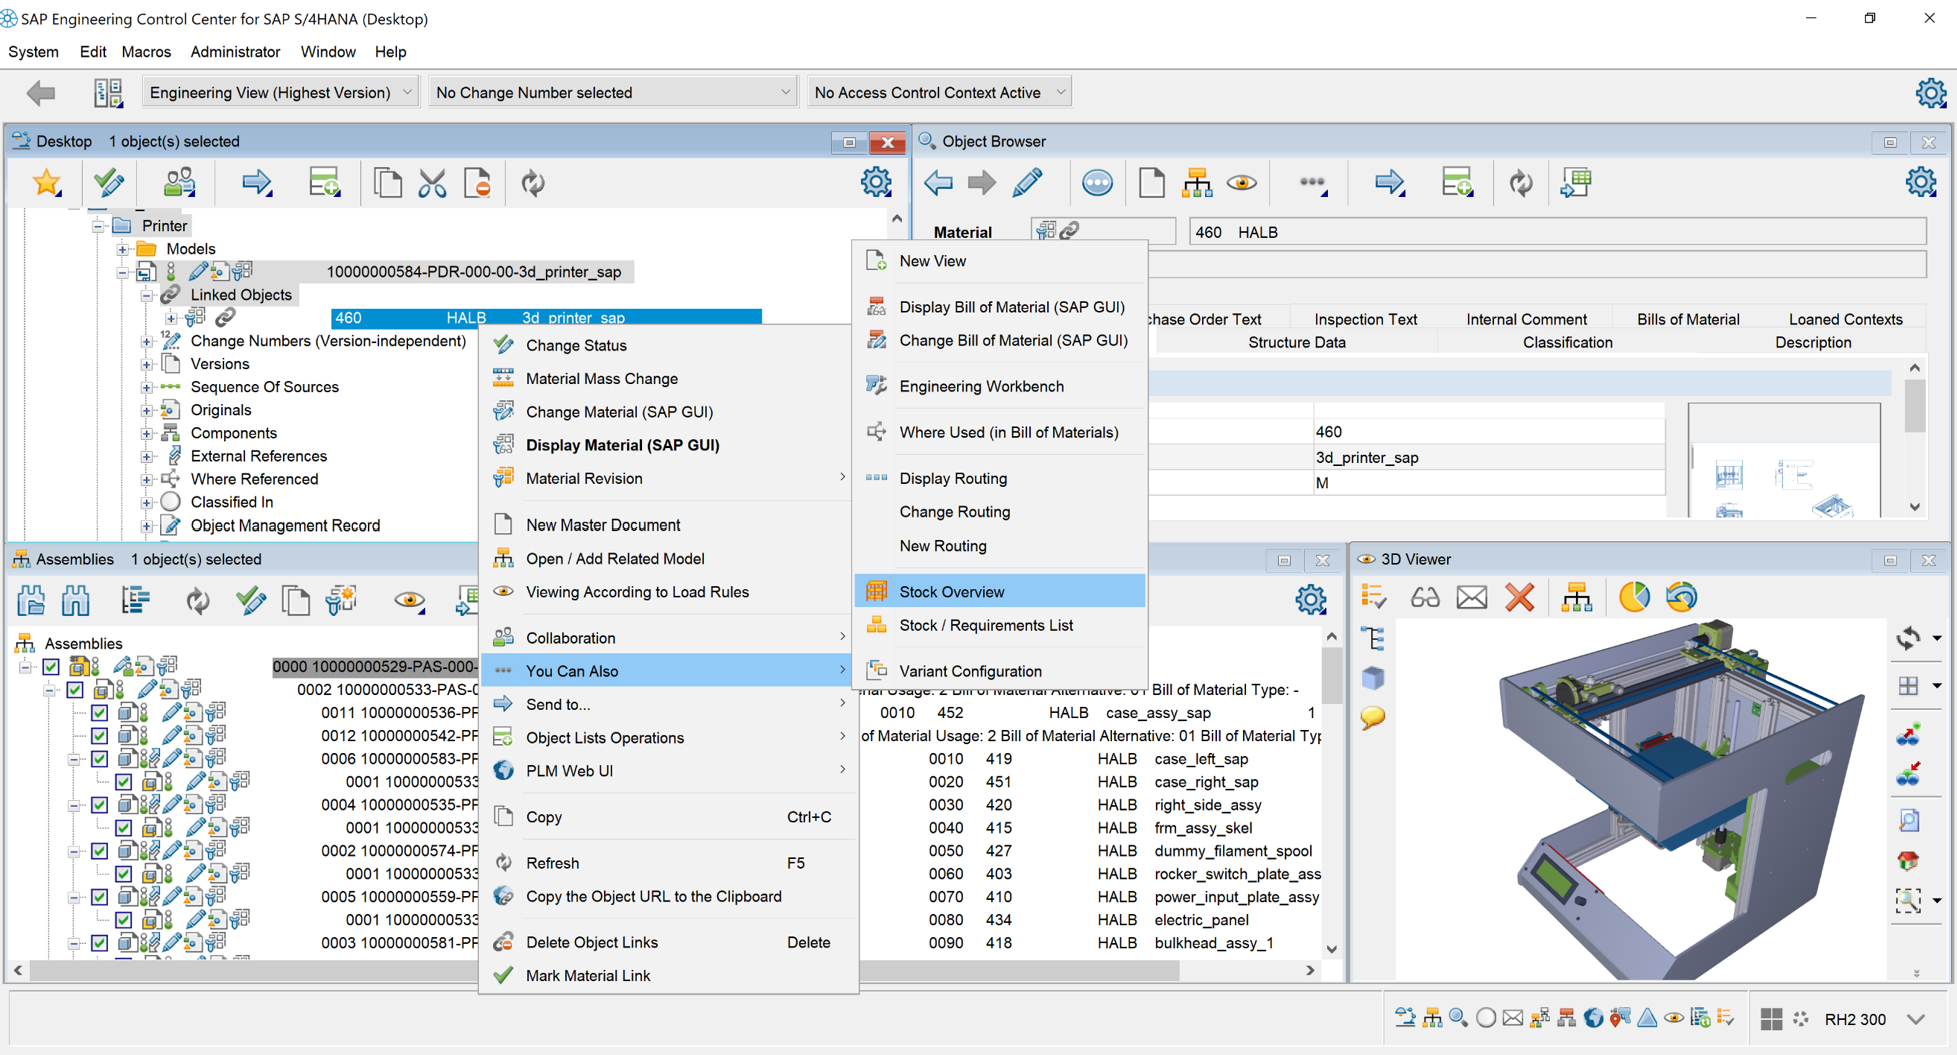 Object-specific context menu of the SAP Engineering Control Center